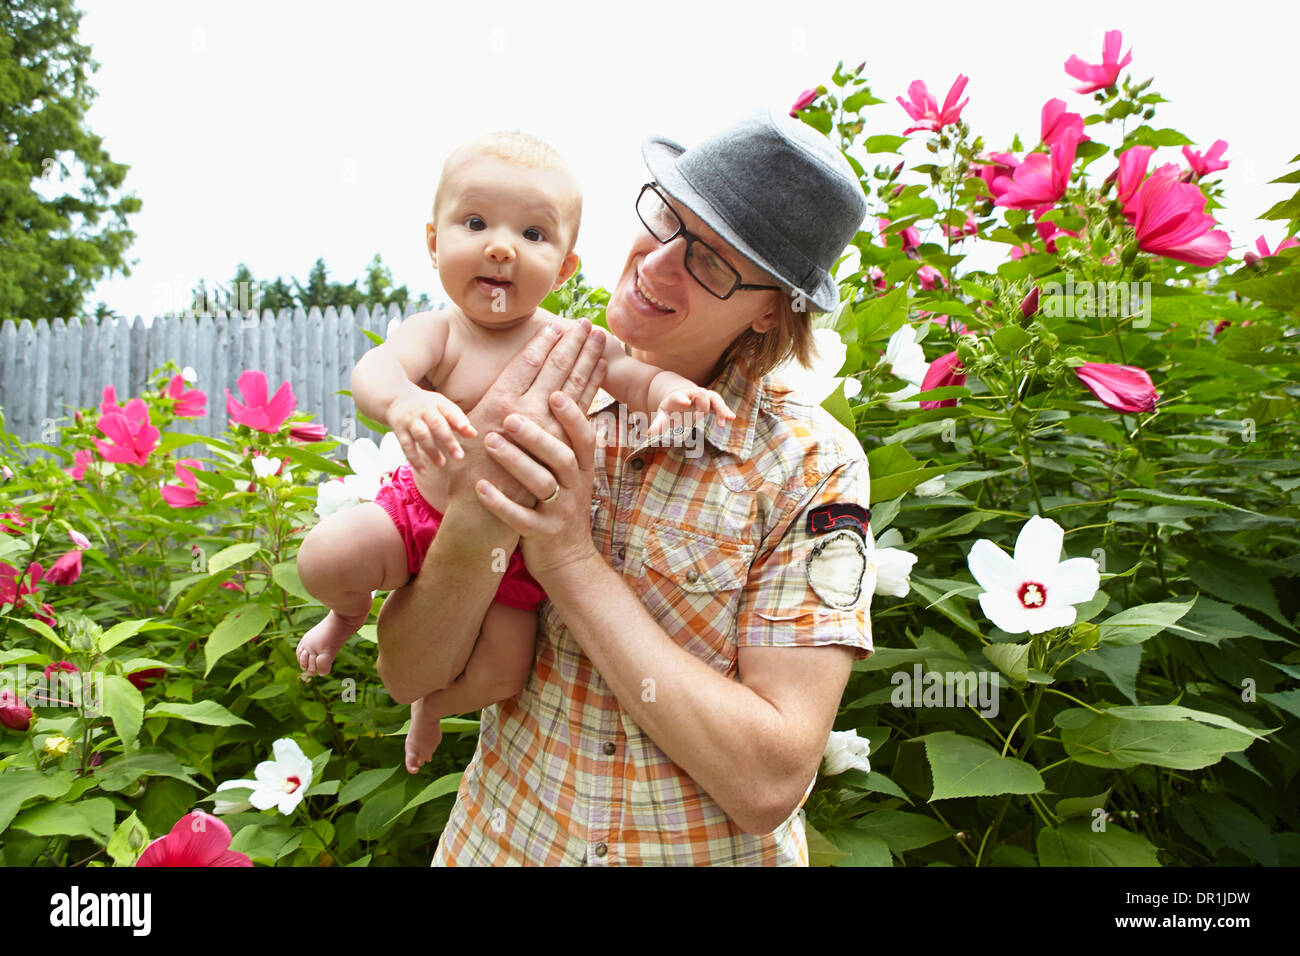 Father carrying baby daughter in park Stock Photo